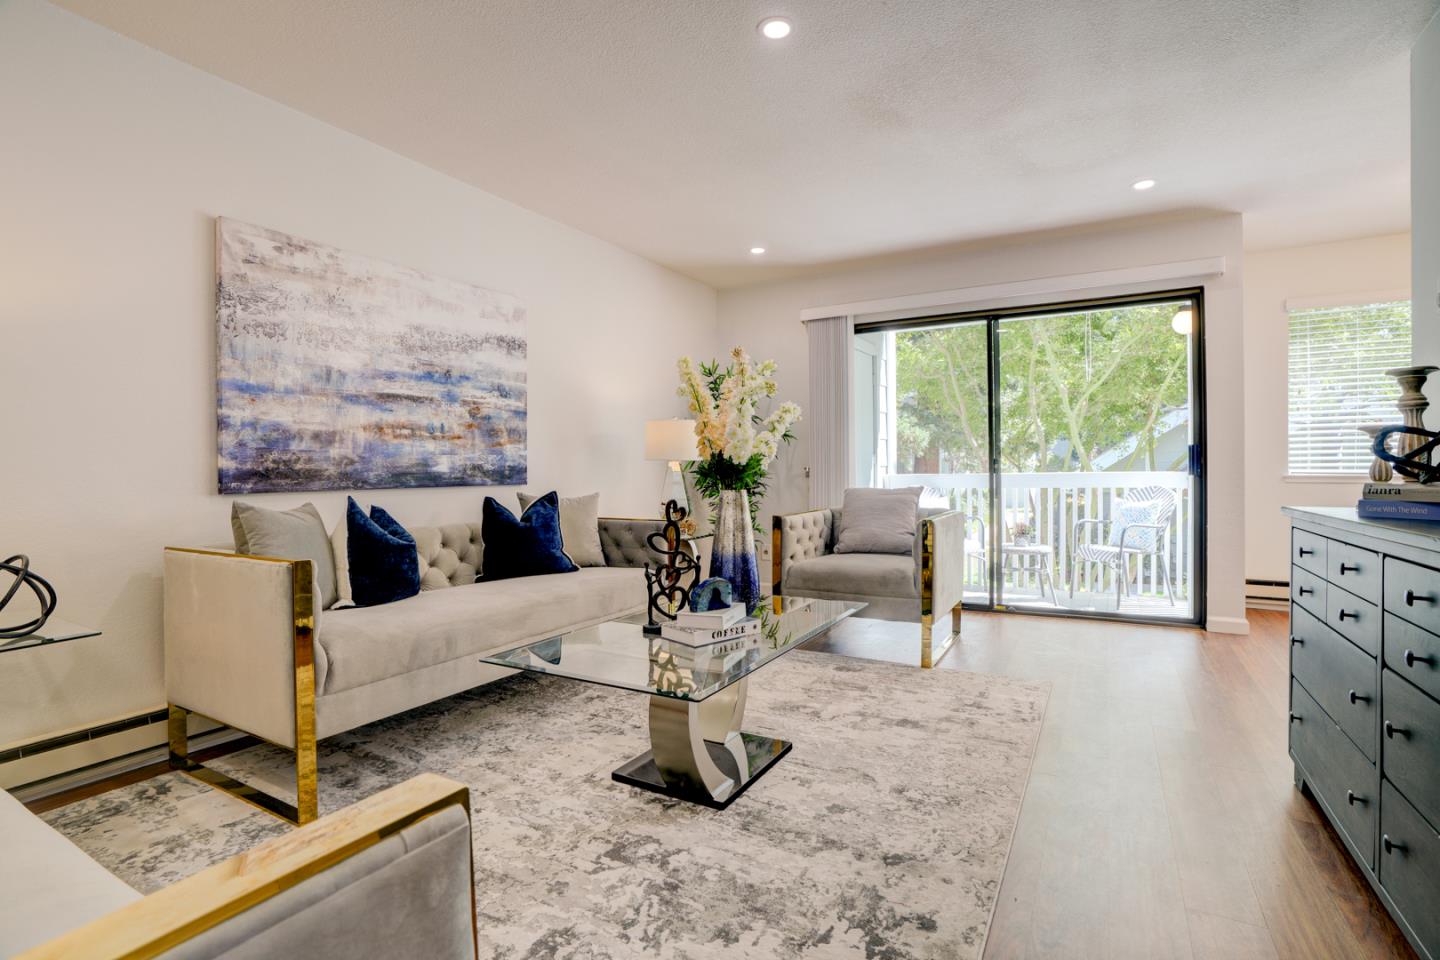 Nested in the west side of Gemello Park neighborhood, this condo is surrounded by Redwoods, Japanese Maples, and Magnolia trees, a truly City Oasis. Freshly painted and tastefully remodeled through out. Kitchen features quartz countertop, newer stainless steel appliances, tray lighted ceiling and a dining area next to the kitchen. Two spacious bedrooms have lots of natural light, as well as a large walk-in primary closet. Bathroom showcases wonderful upgrades, quarts countertop, modern vanity and tile shower/bathtub. Newer washer/dryer and flooring. Living room leads to a private balcony with large storage closet, overlooks a gorgeous Japanese Maple tree and has views of the well maintained clubhouse and pool. Detached oversized one car garage features auto opener.  Amazing location with walking distance to MV Downtown, San Antonio Shopping Center, parks, schools and trail. Minutes away from Google and other Tech companies and easy access to Freeways. Top rated Los Altos school!